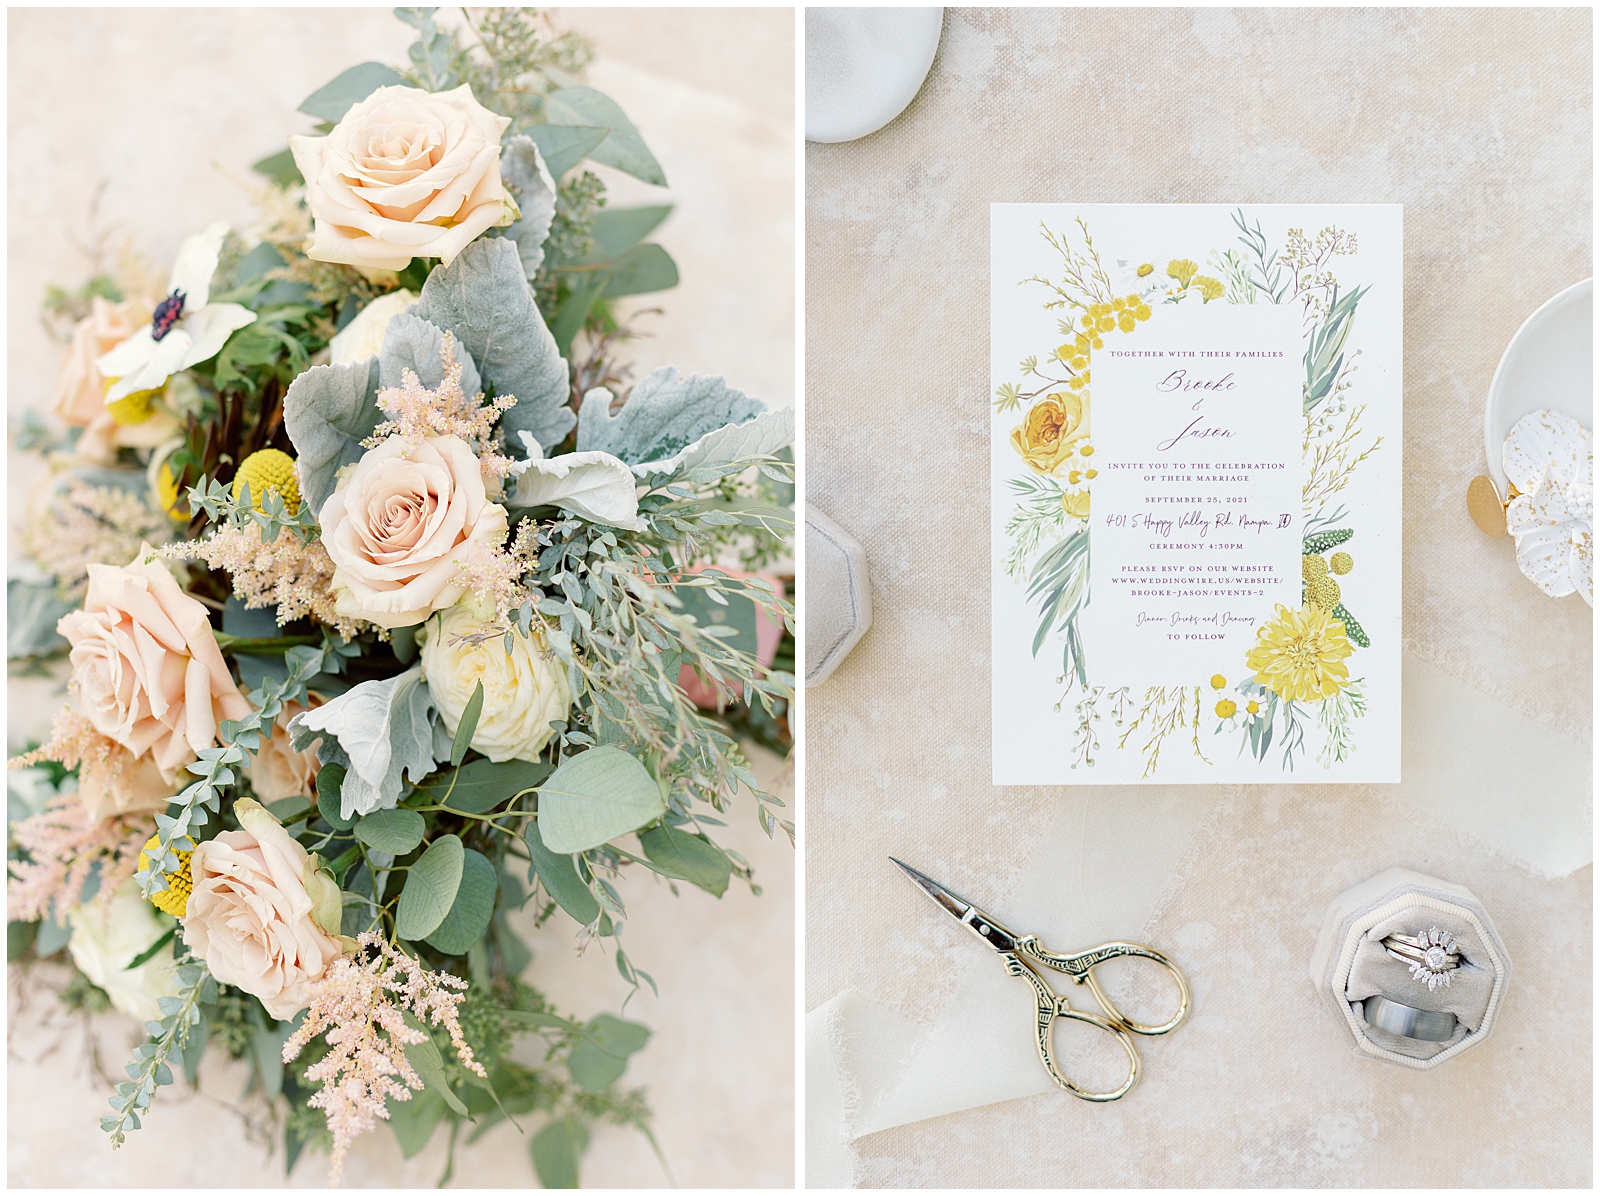 Bridal Bouquet and Invitation Suite at Timeless White Barn at Happy Valley Wedding